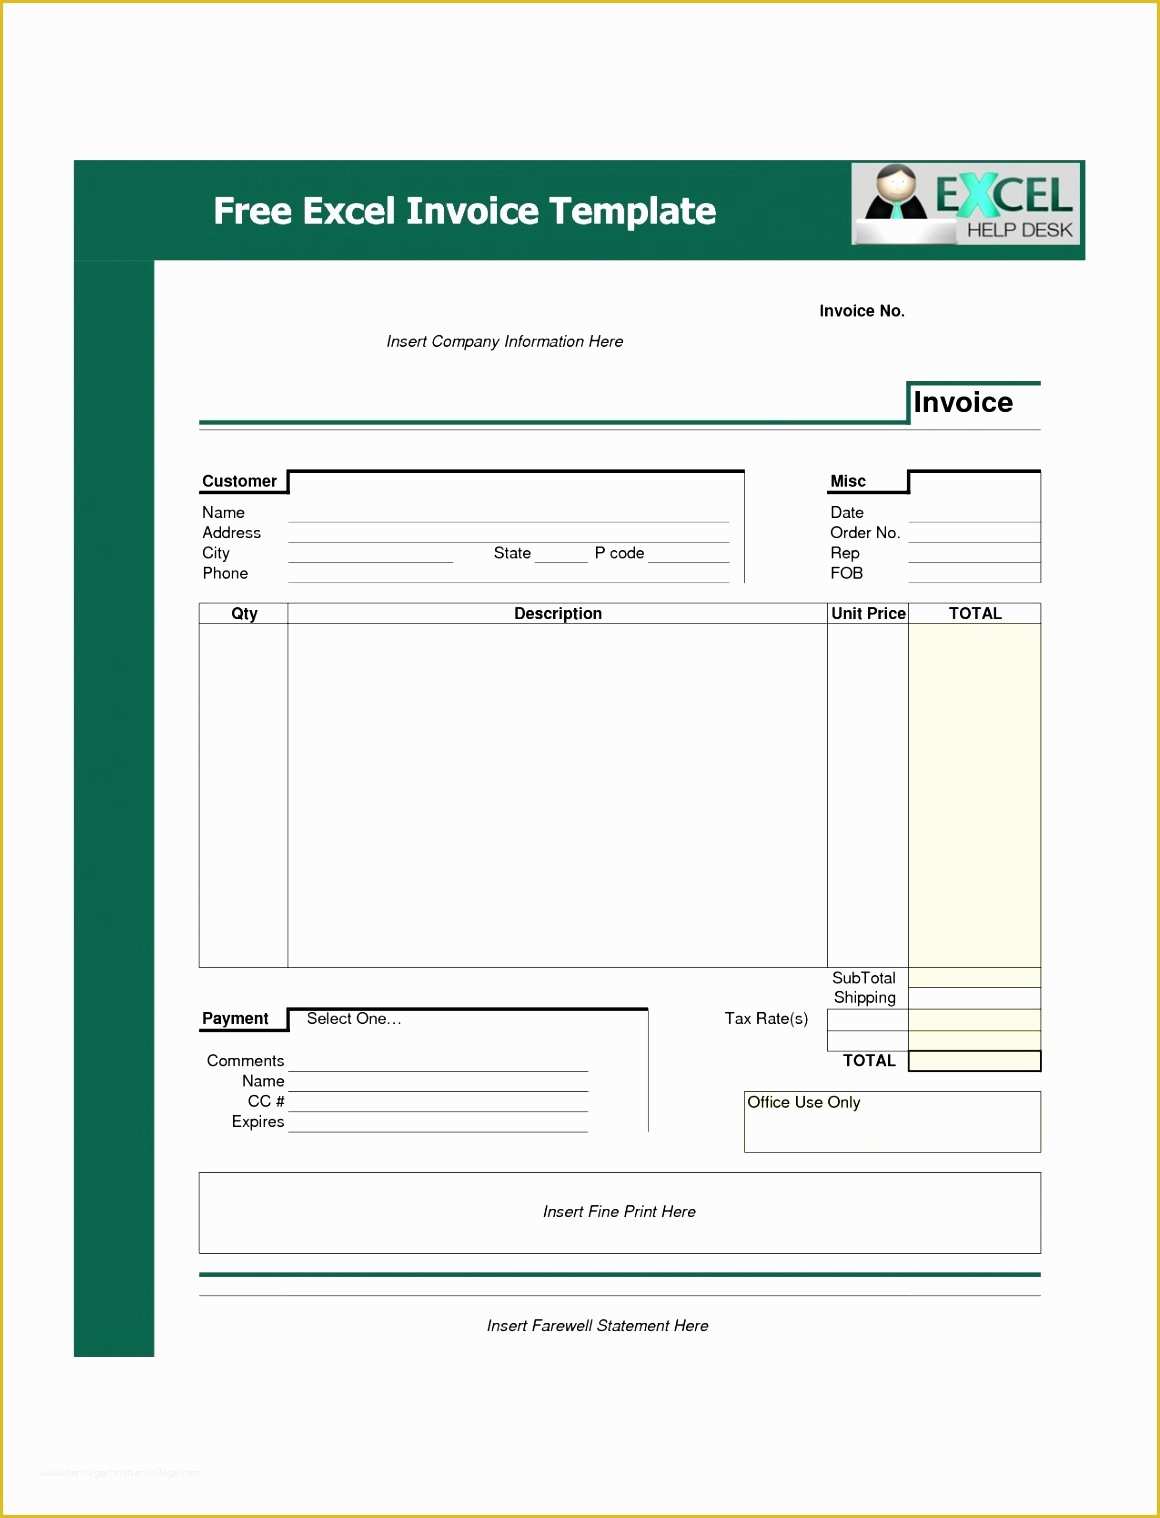 Microsoft Excel Invoice Template Free Of 10 Microsoft Excel Invoice Template Free Download